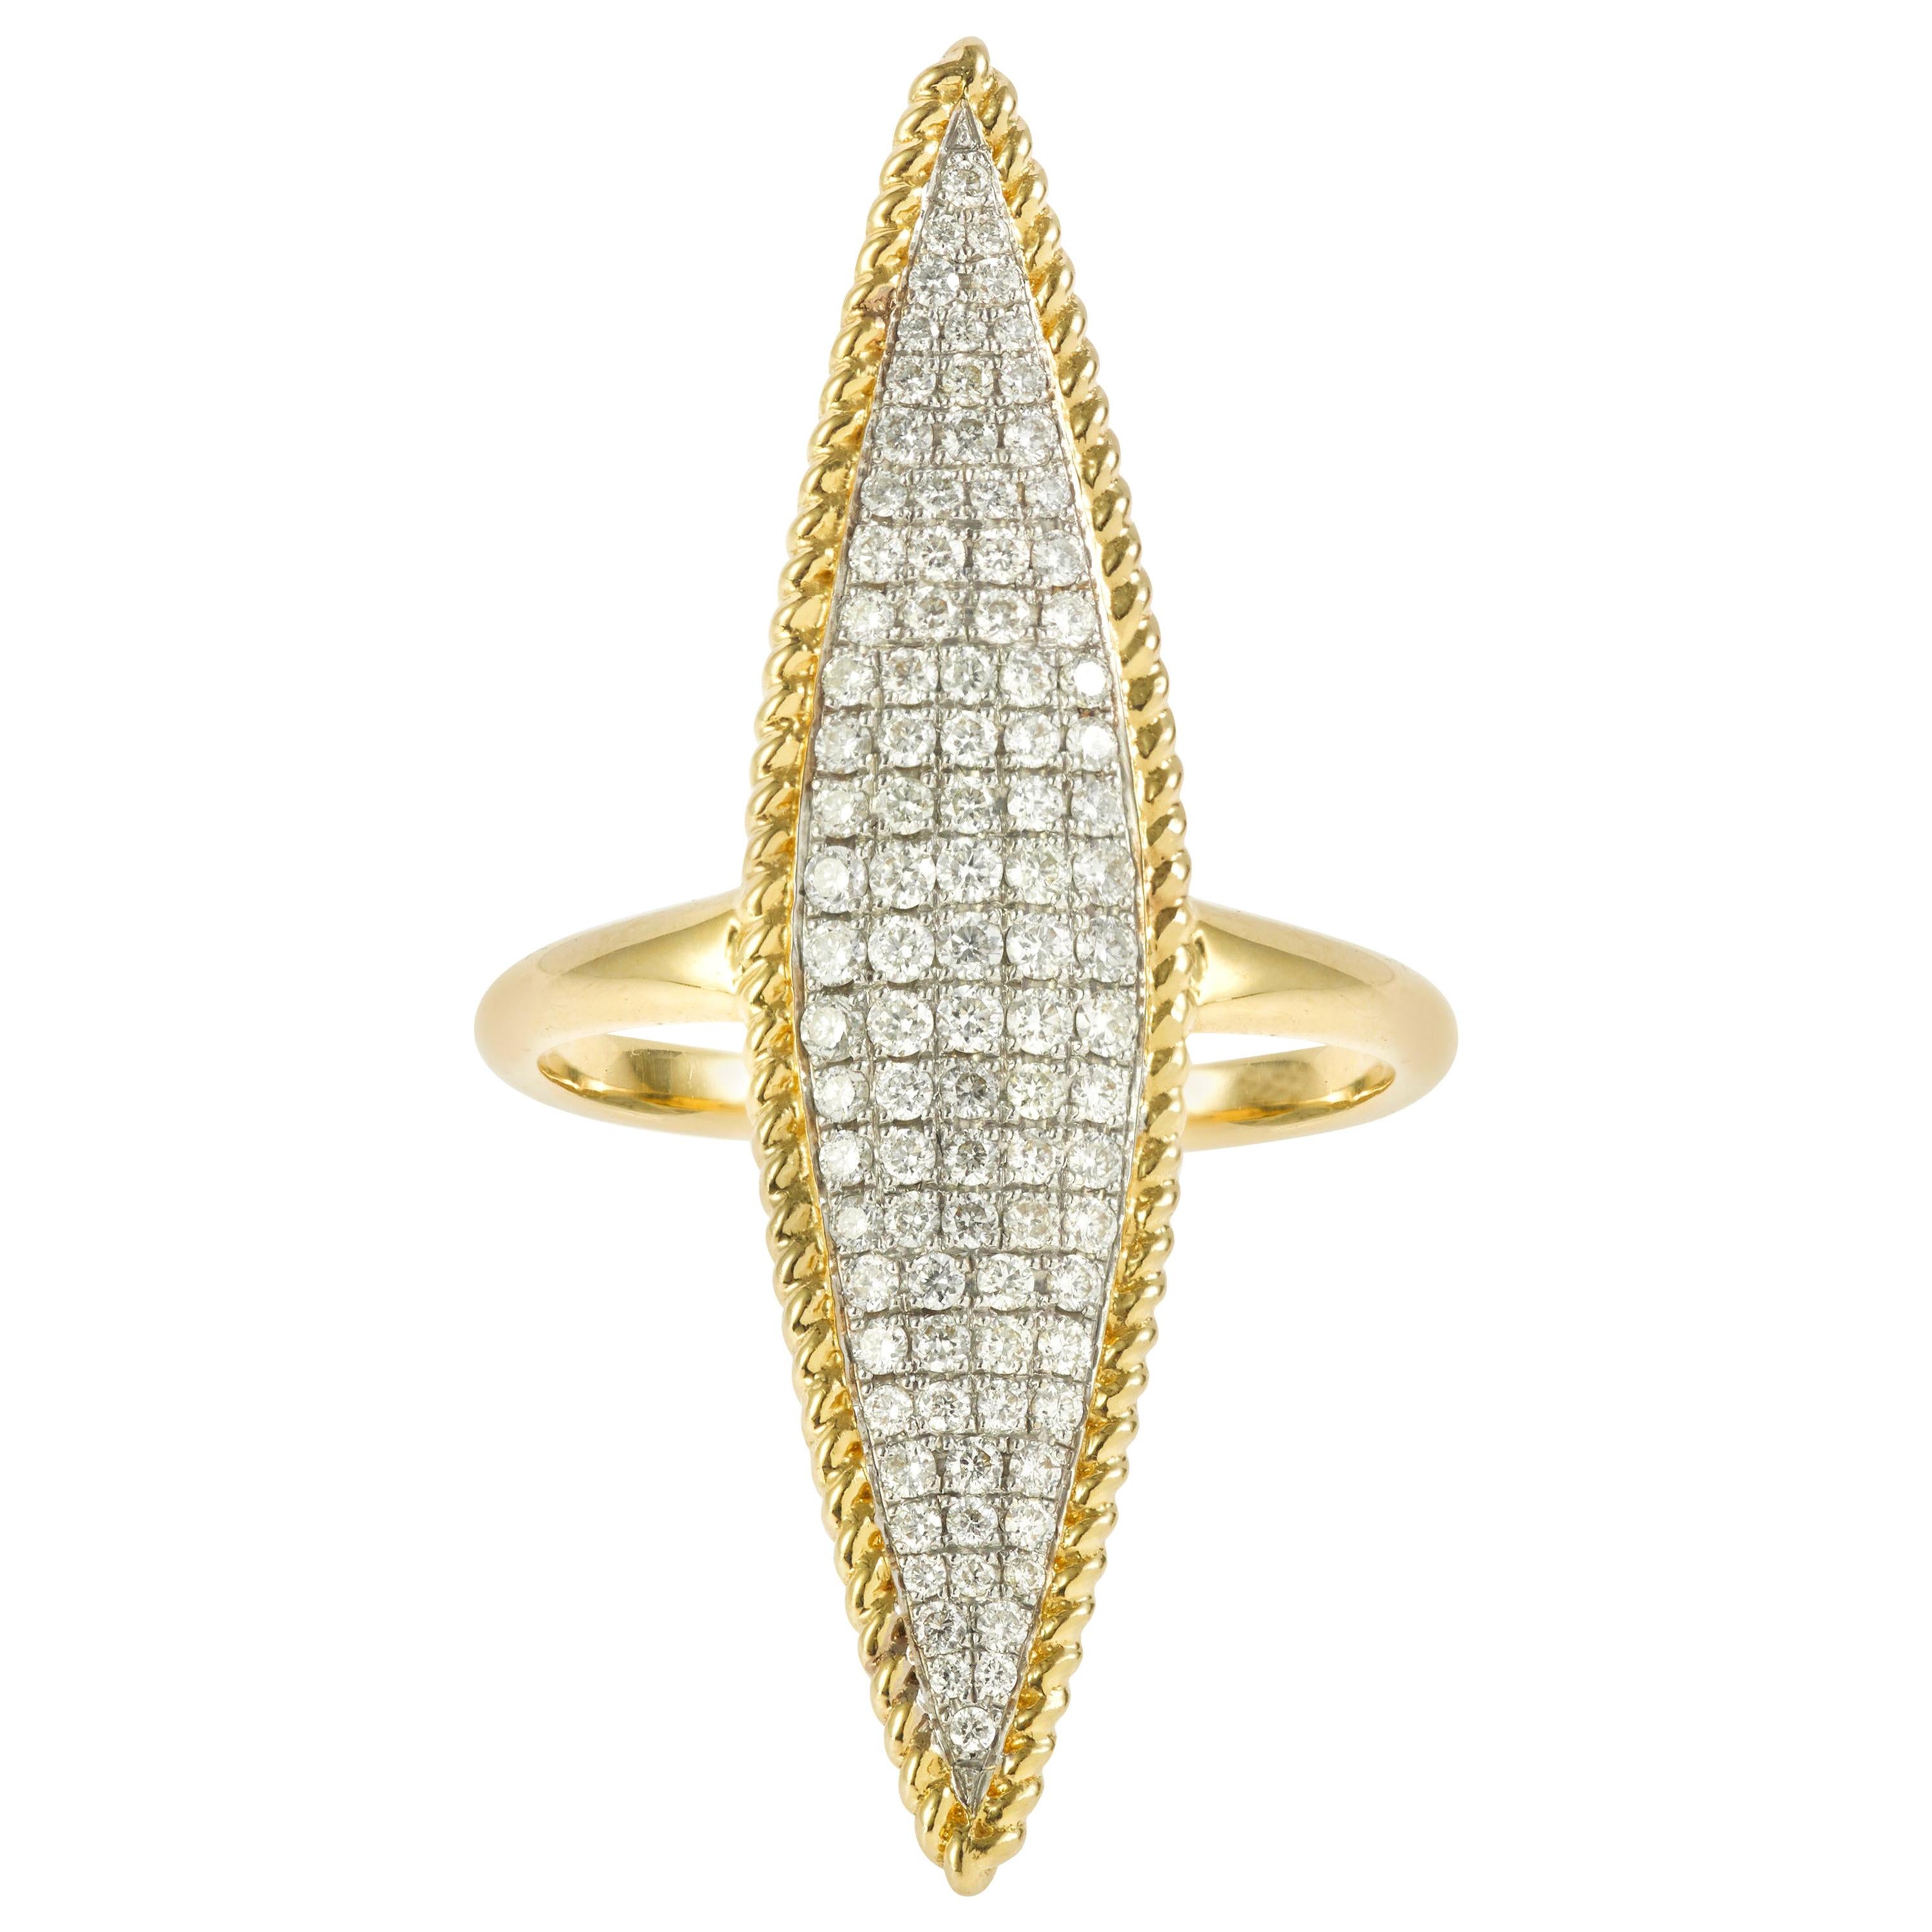 Yvonne Leon's Ring in 18 Carat Yellow and White Gold with Diamonds For Sale